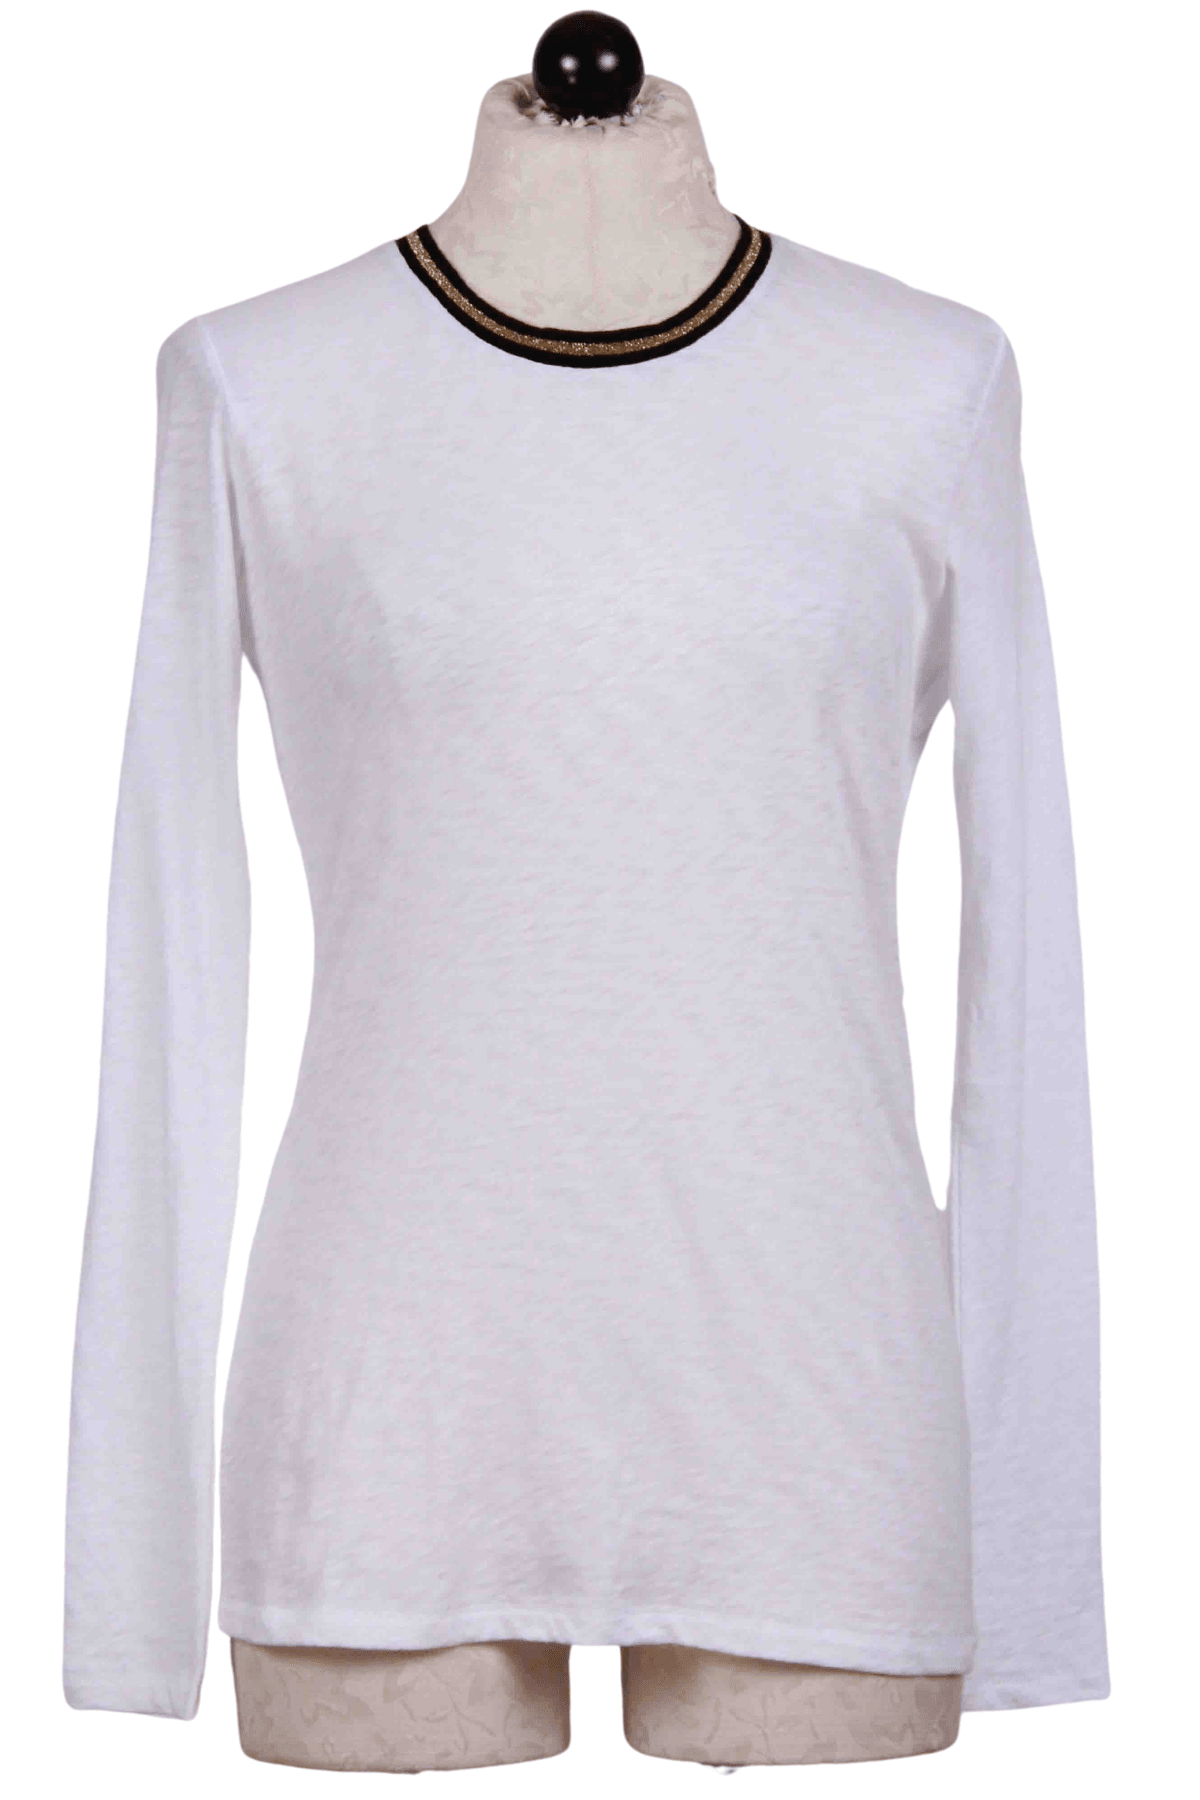 white Gold Tipped Ringer Tee by Goldie LeWinter